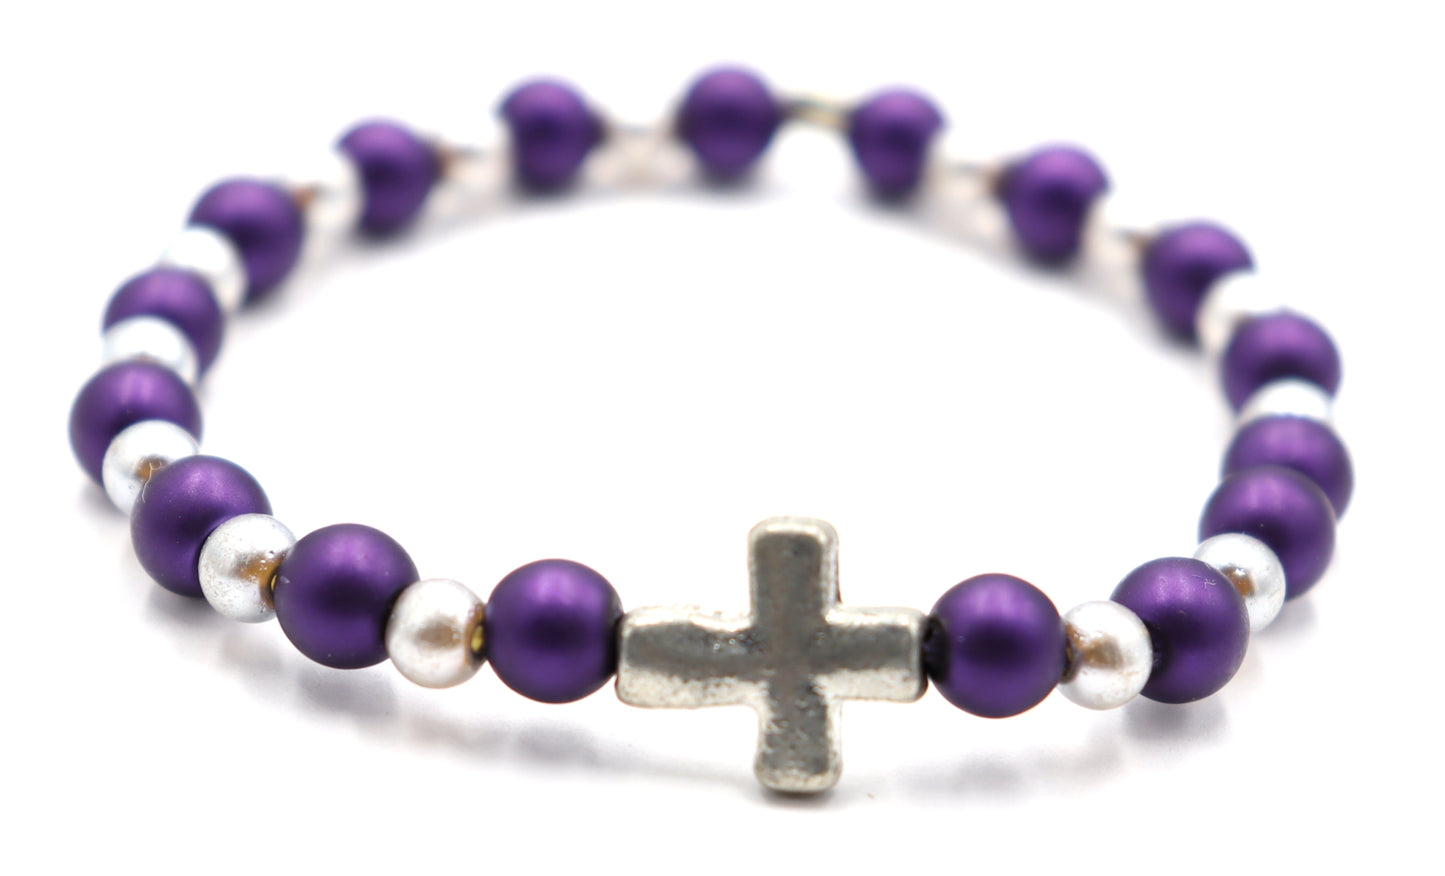 Royal Purple and Silver Pearl Glass Beads with Silver Tone Metallic Cross Stretch Bracelet by Monkey's Mojo